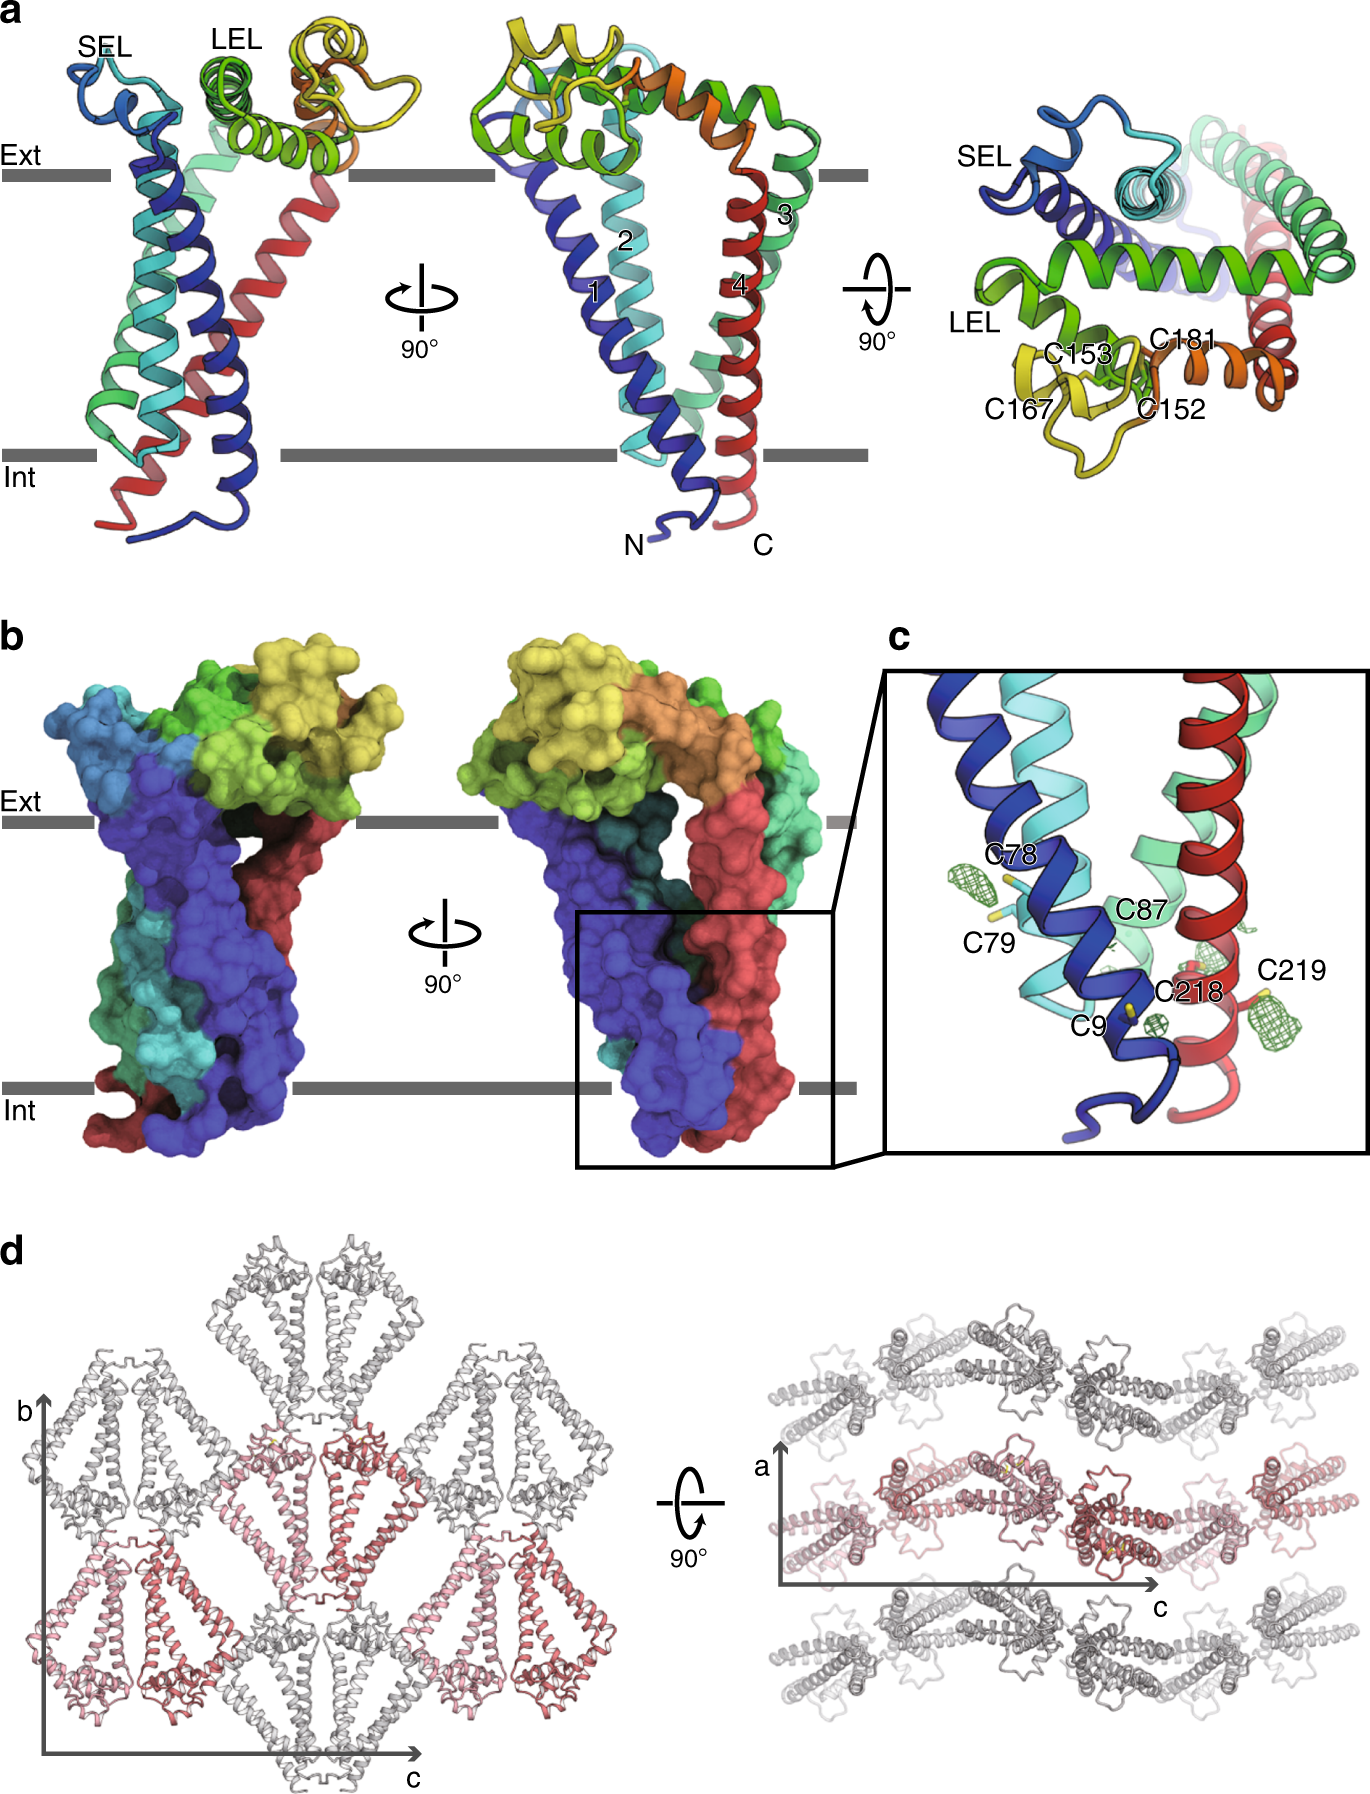 Structural insights into tetraspanin CD9 function | Nature Communications